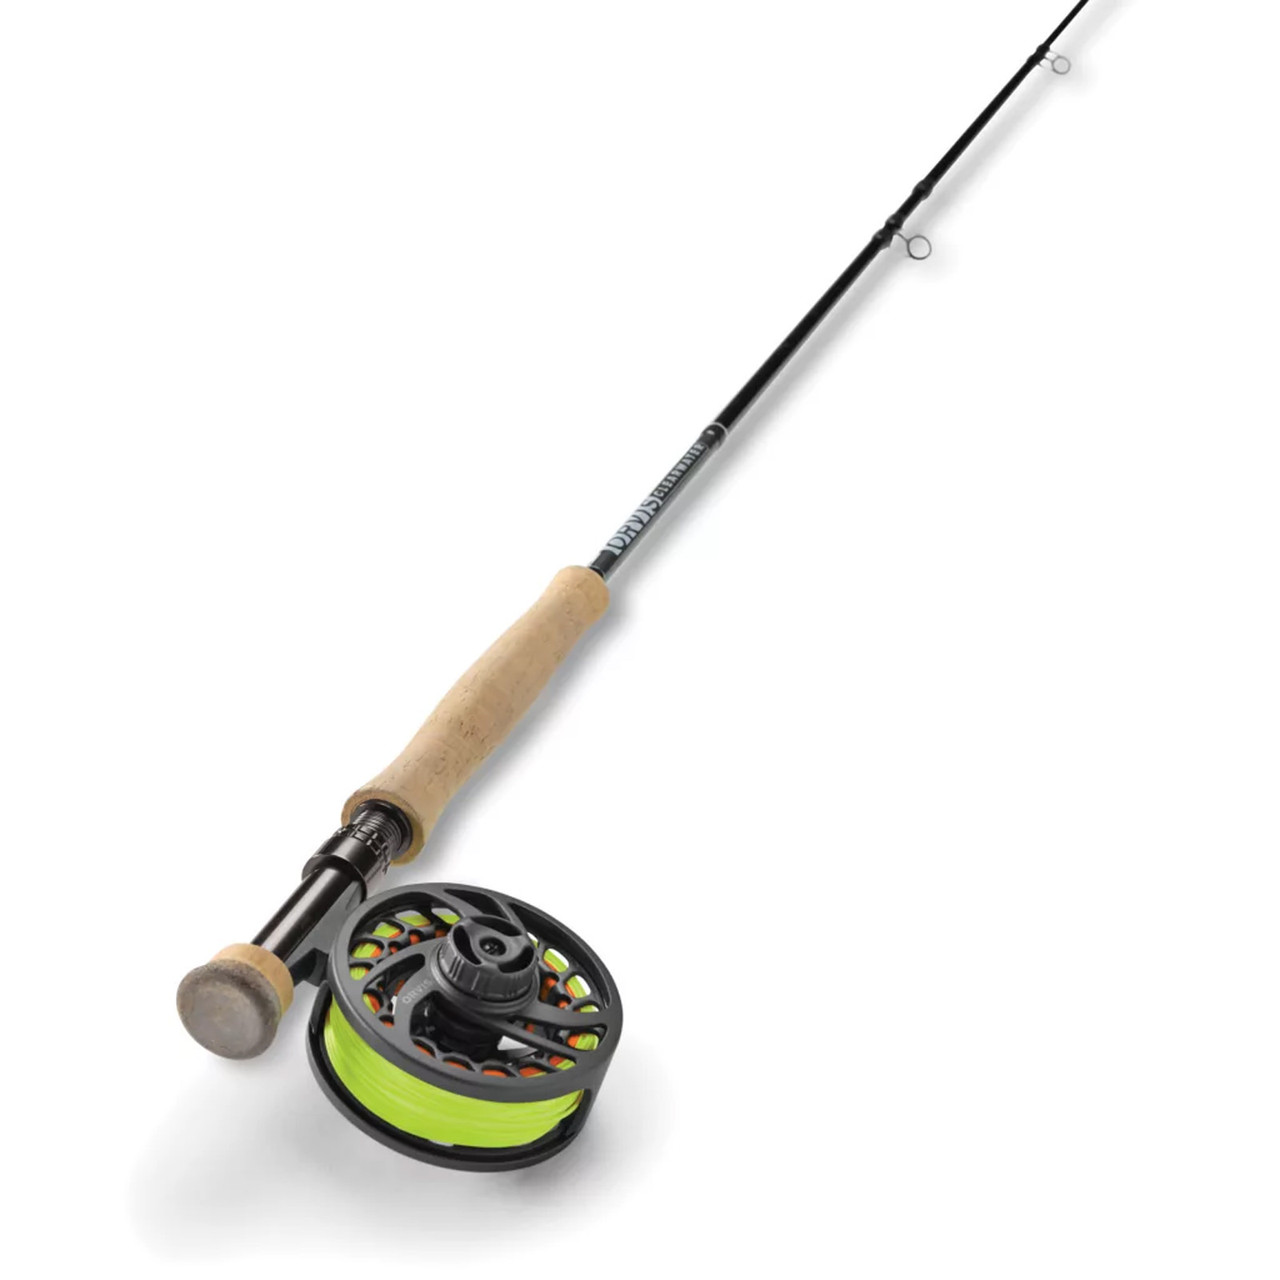 Orvis Clearwater Fly Fishing Outfit 3wt 10'0 4pc - AvidMax